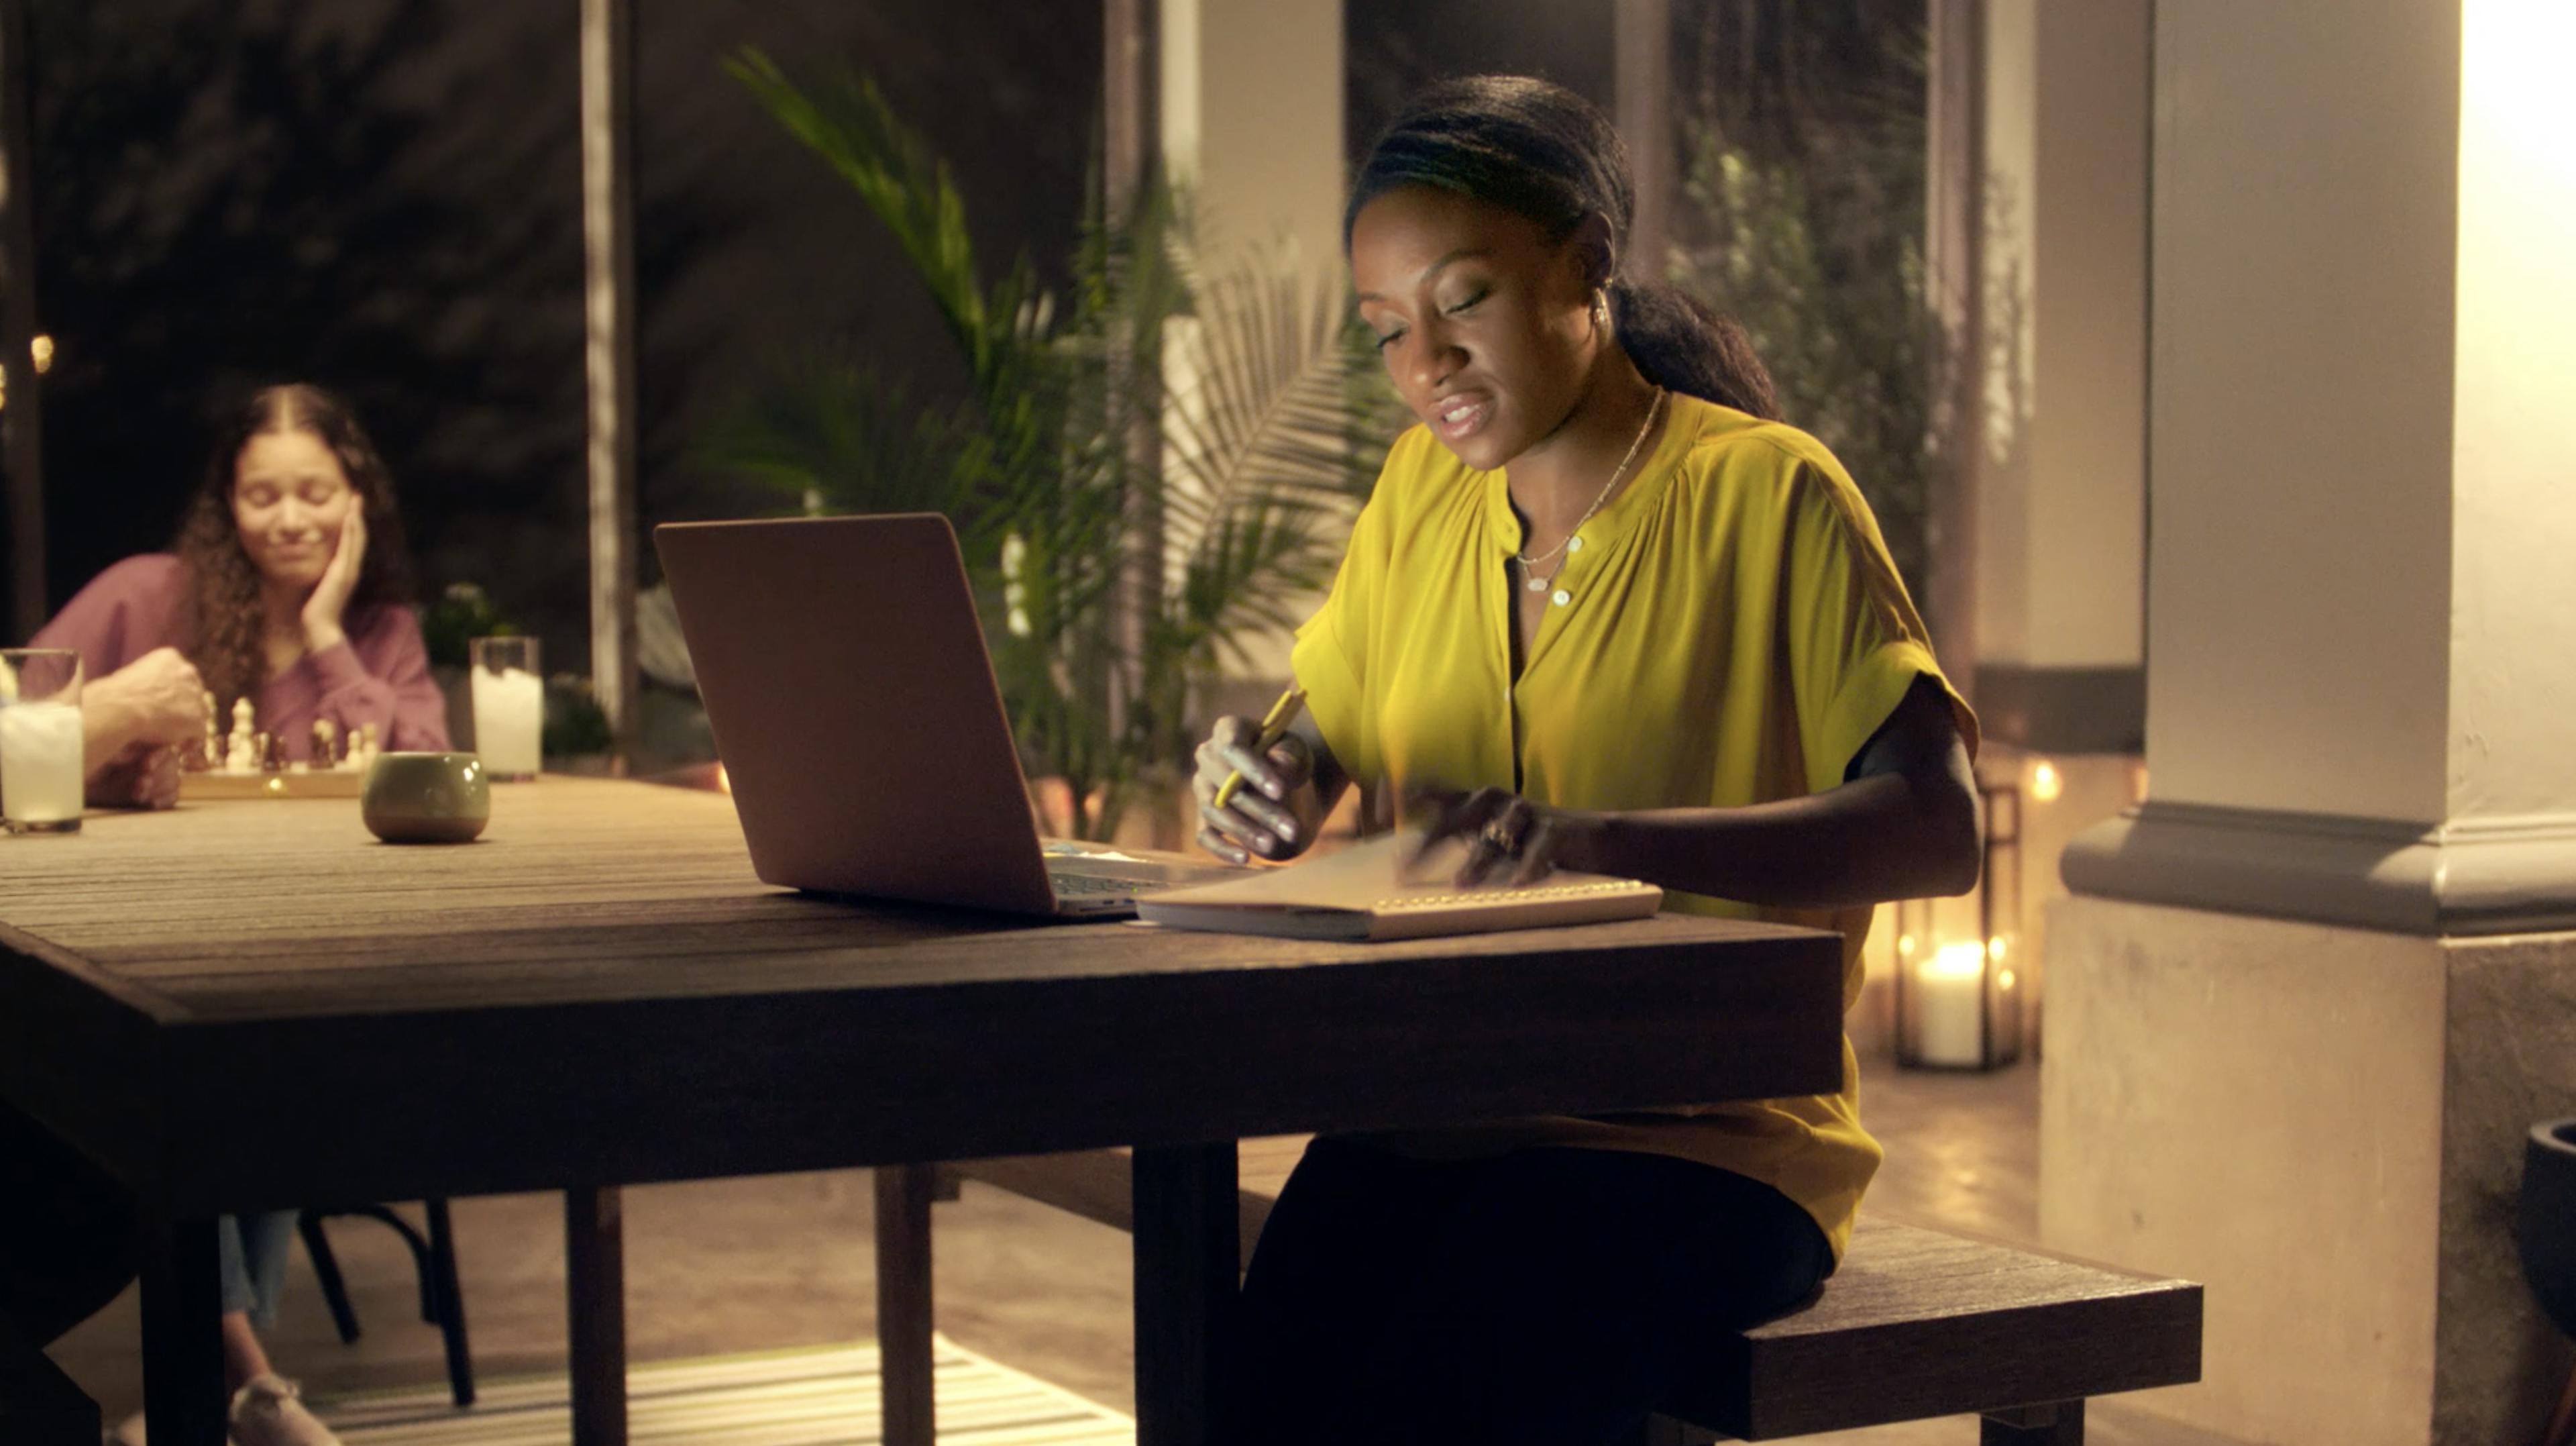 A woman works on her laptop in a candlelit space